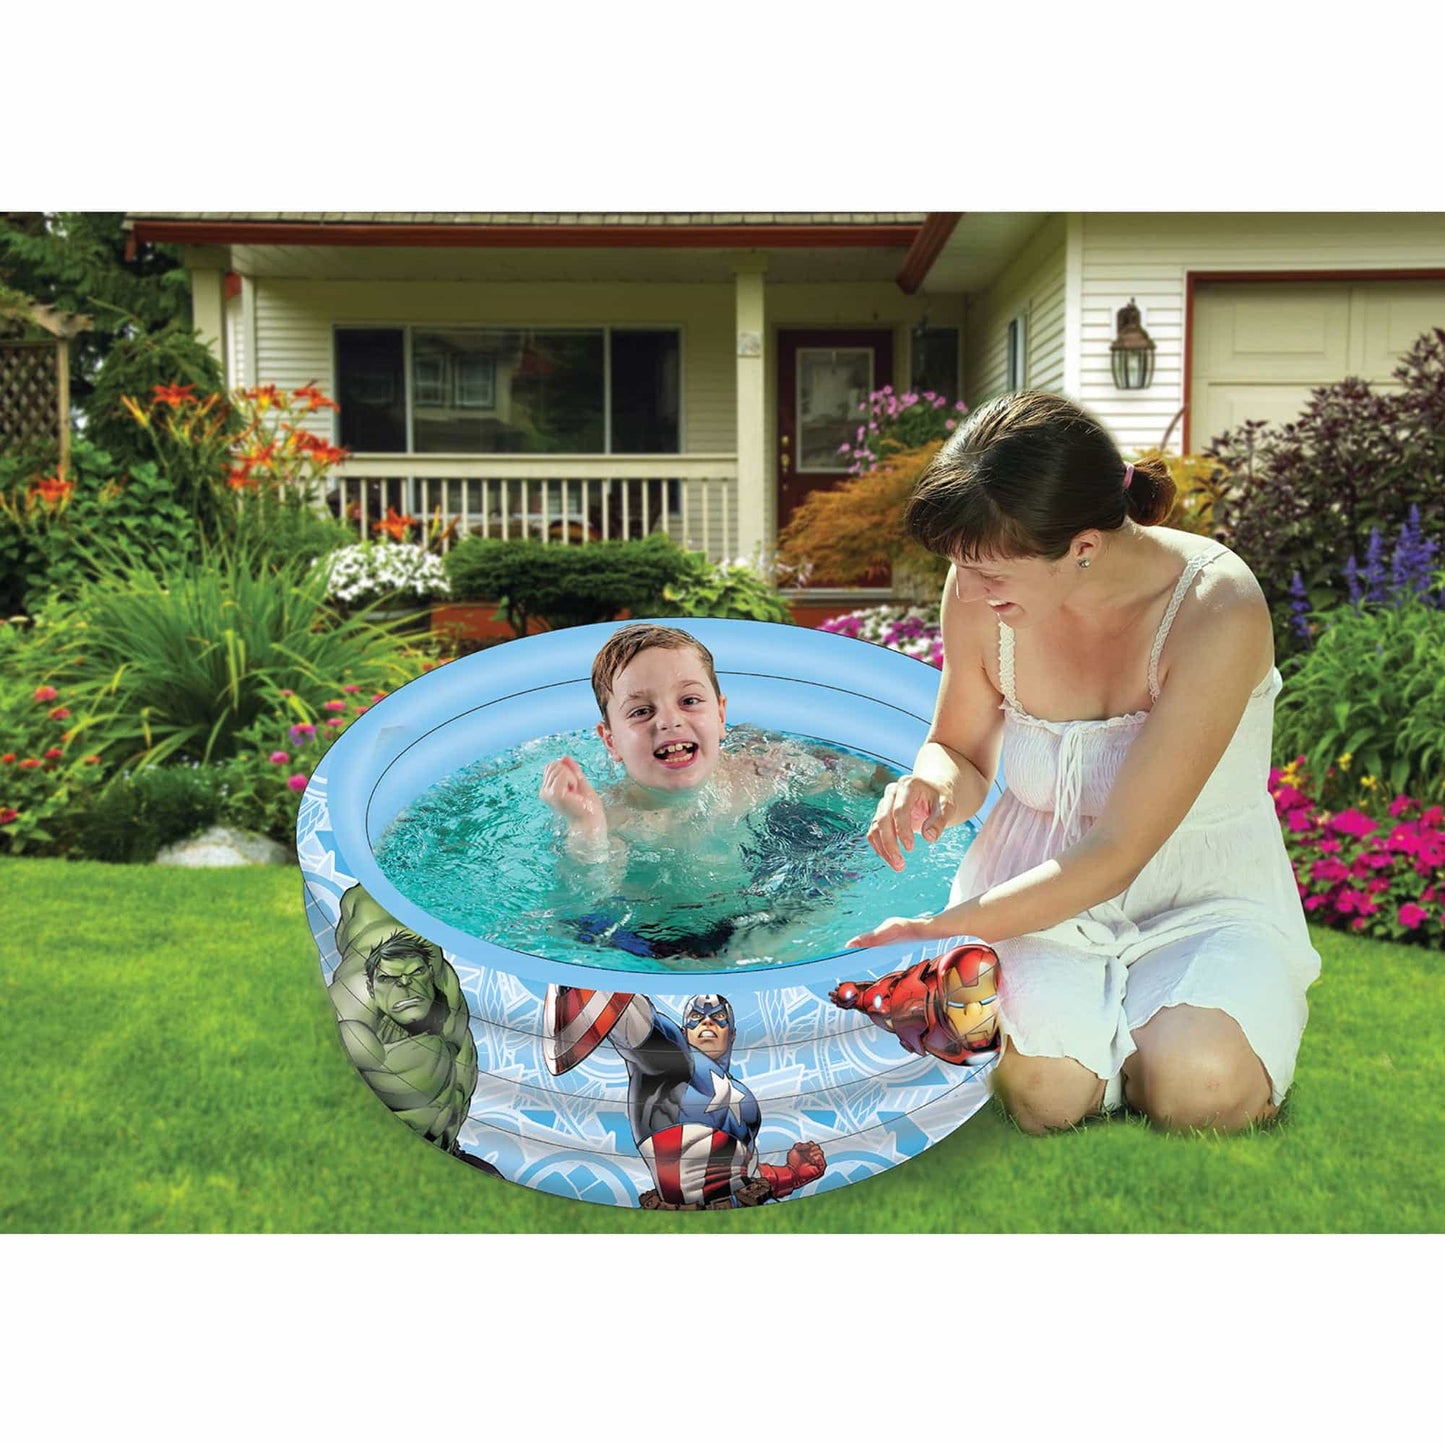 Marvel Avengers Inflatable Swimming Pool for Kids, 3 Rings Kiddie Pool for Toddlers Infant Baby for Backyard Indoor Outdoor Pool Party Games || 3-8 Years - Toys4All.in